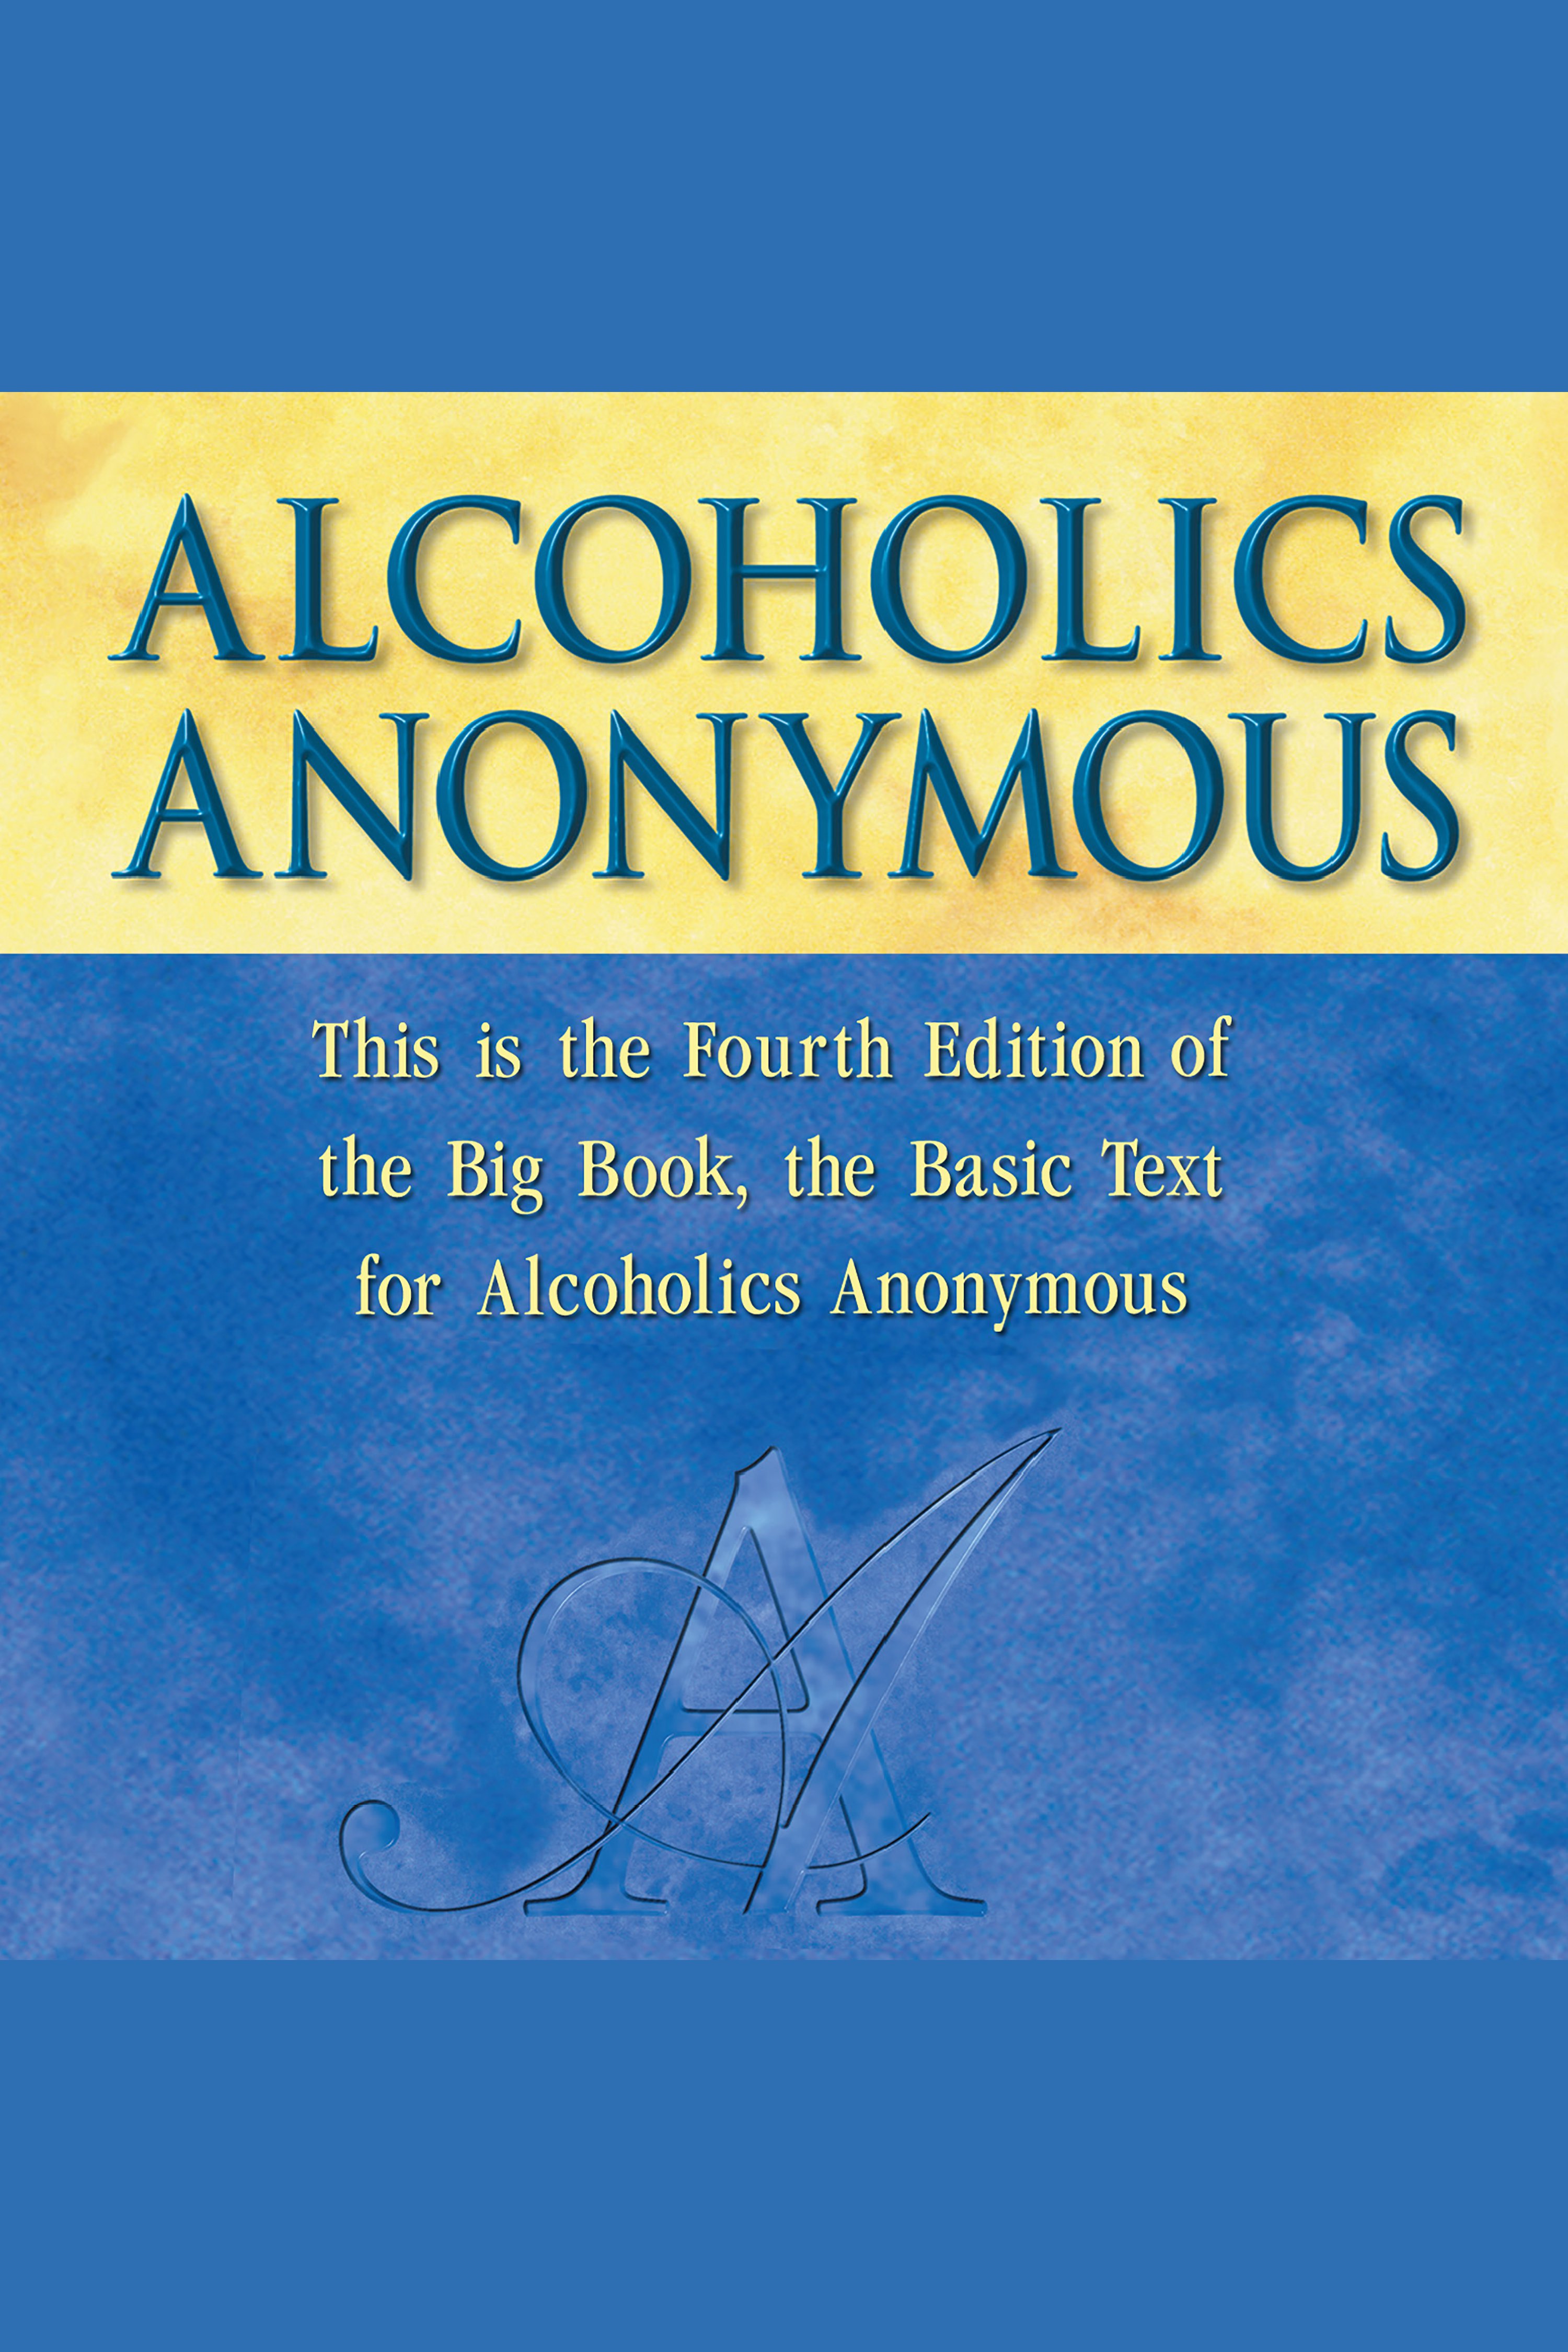 Alcoholics Anonymous, Fourth Edition The official "Big Book" from Alcoholic Anonymous